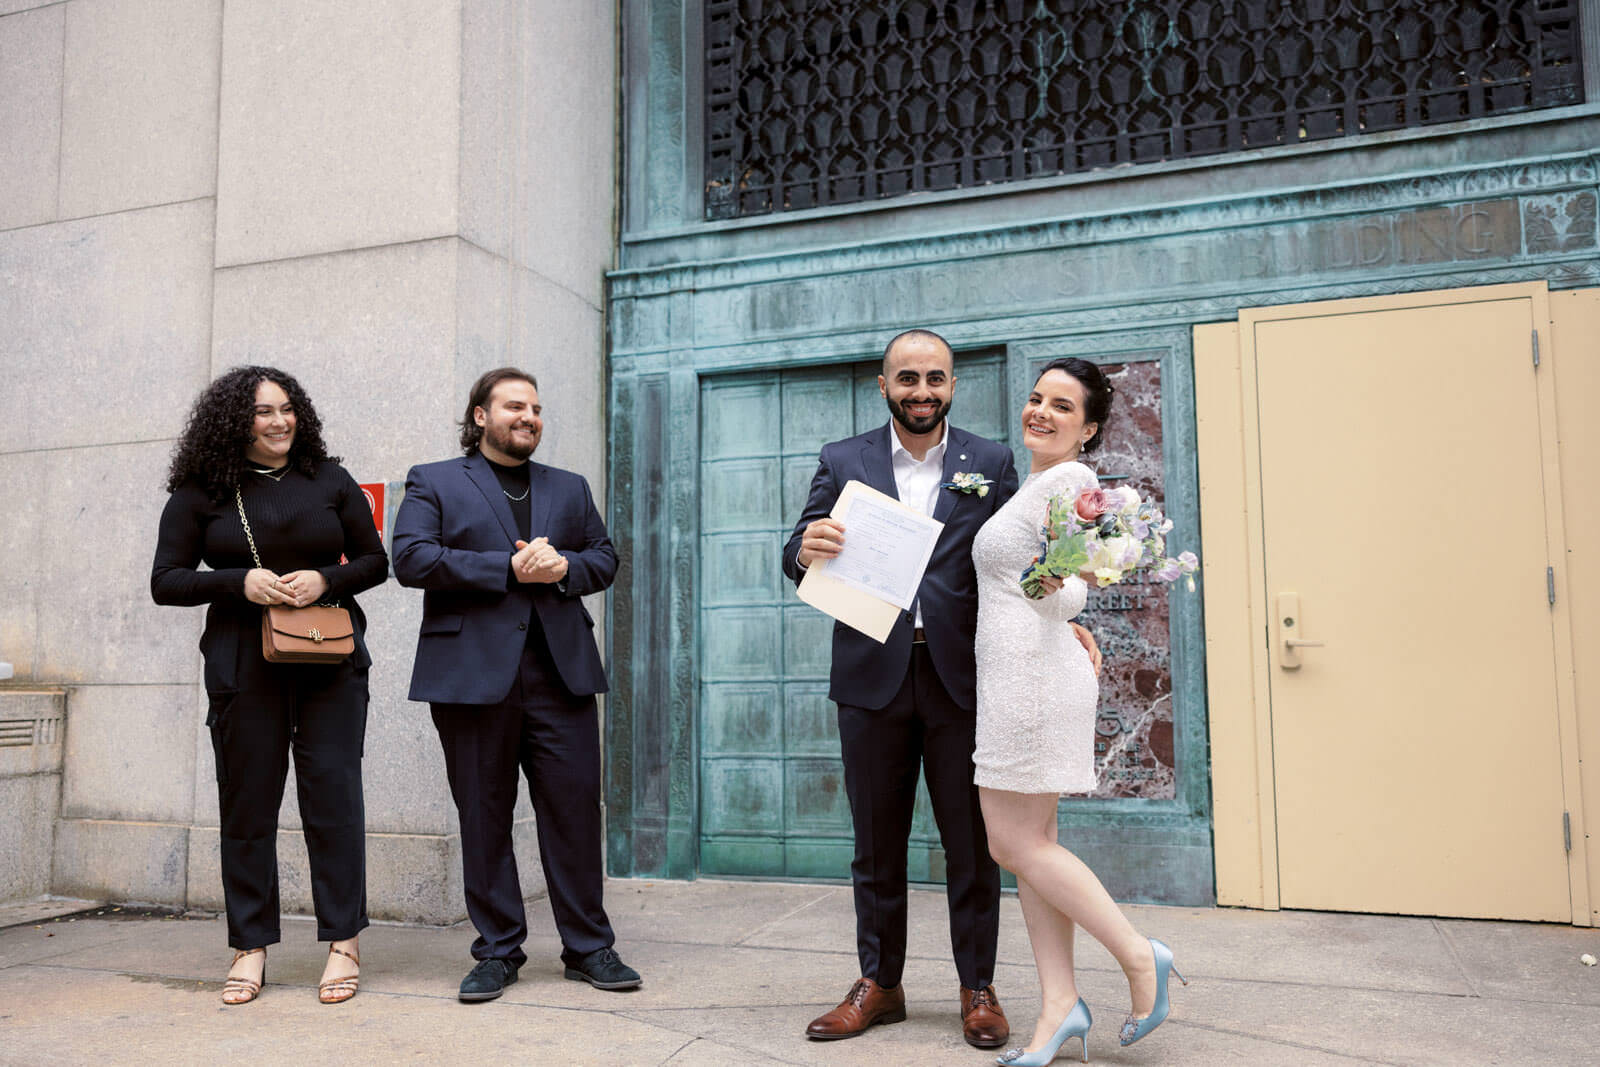 The bride, groom and two guests are outside the exit door after the ceremony. NY City Hall elopement image by Jenny Fu Studio.